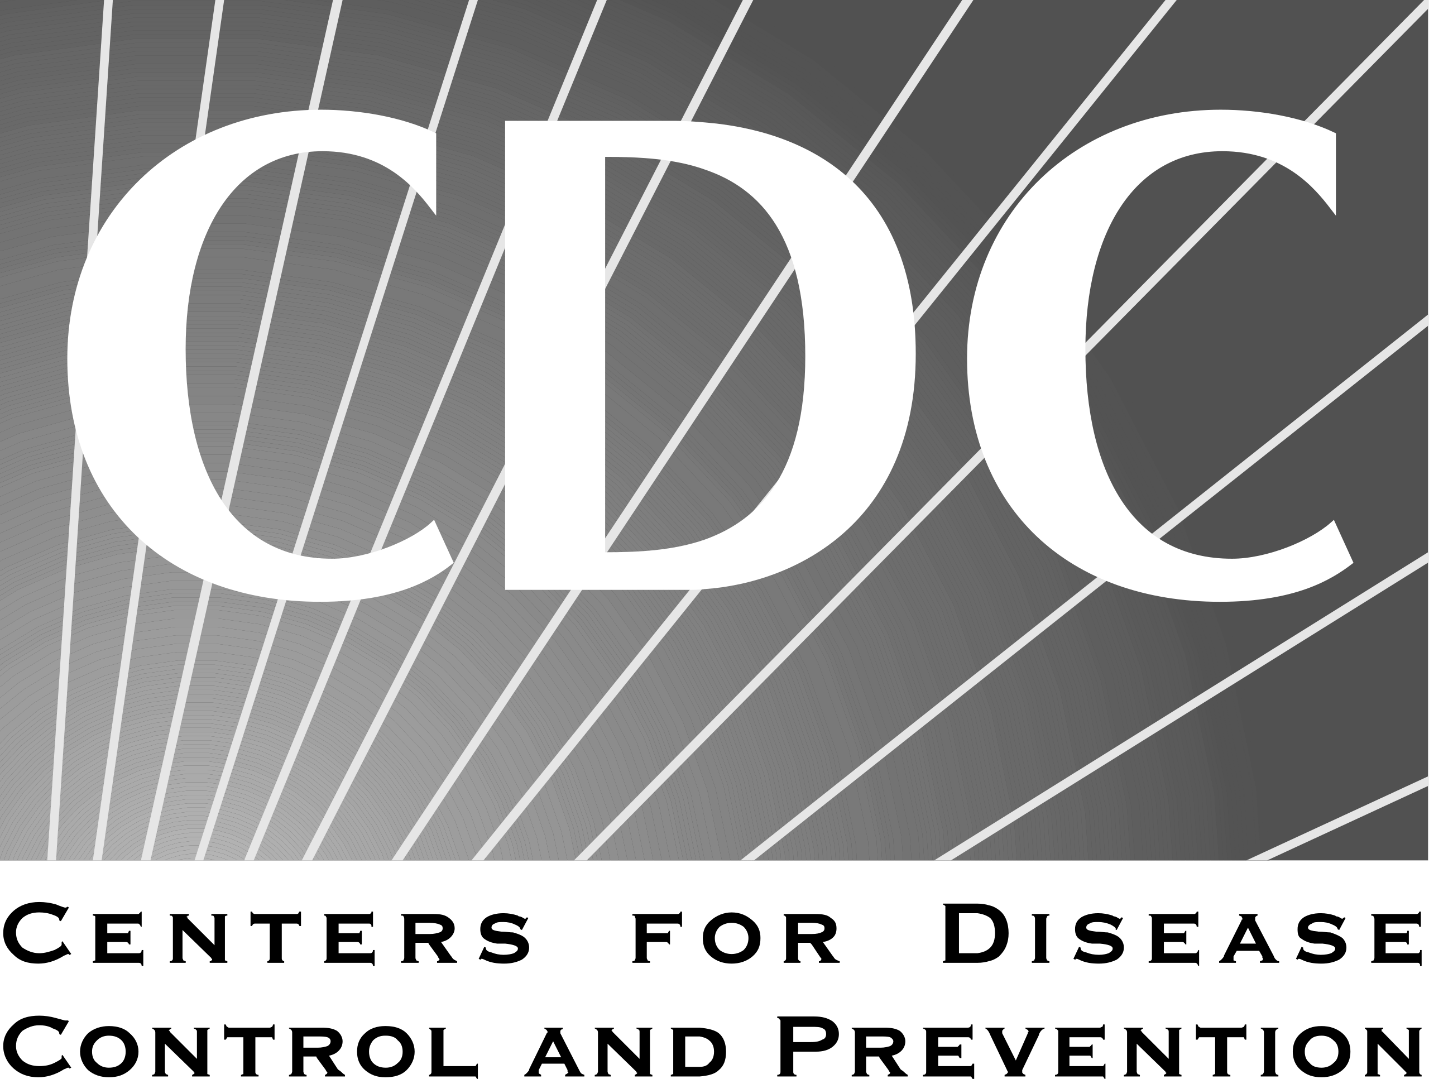 Logo for the Centers for Disease Control and Prevention